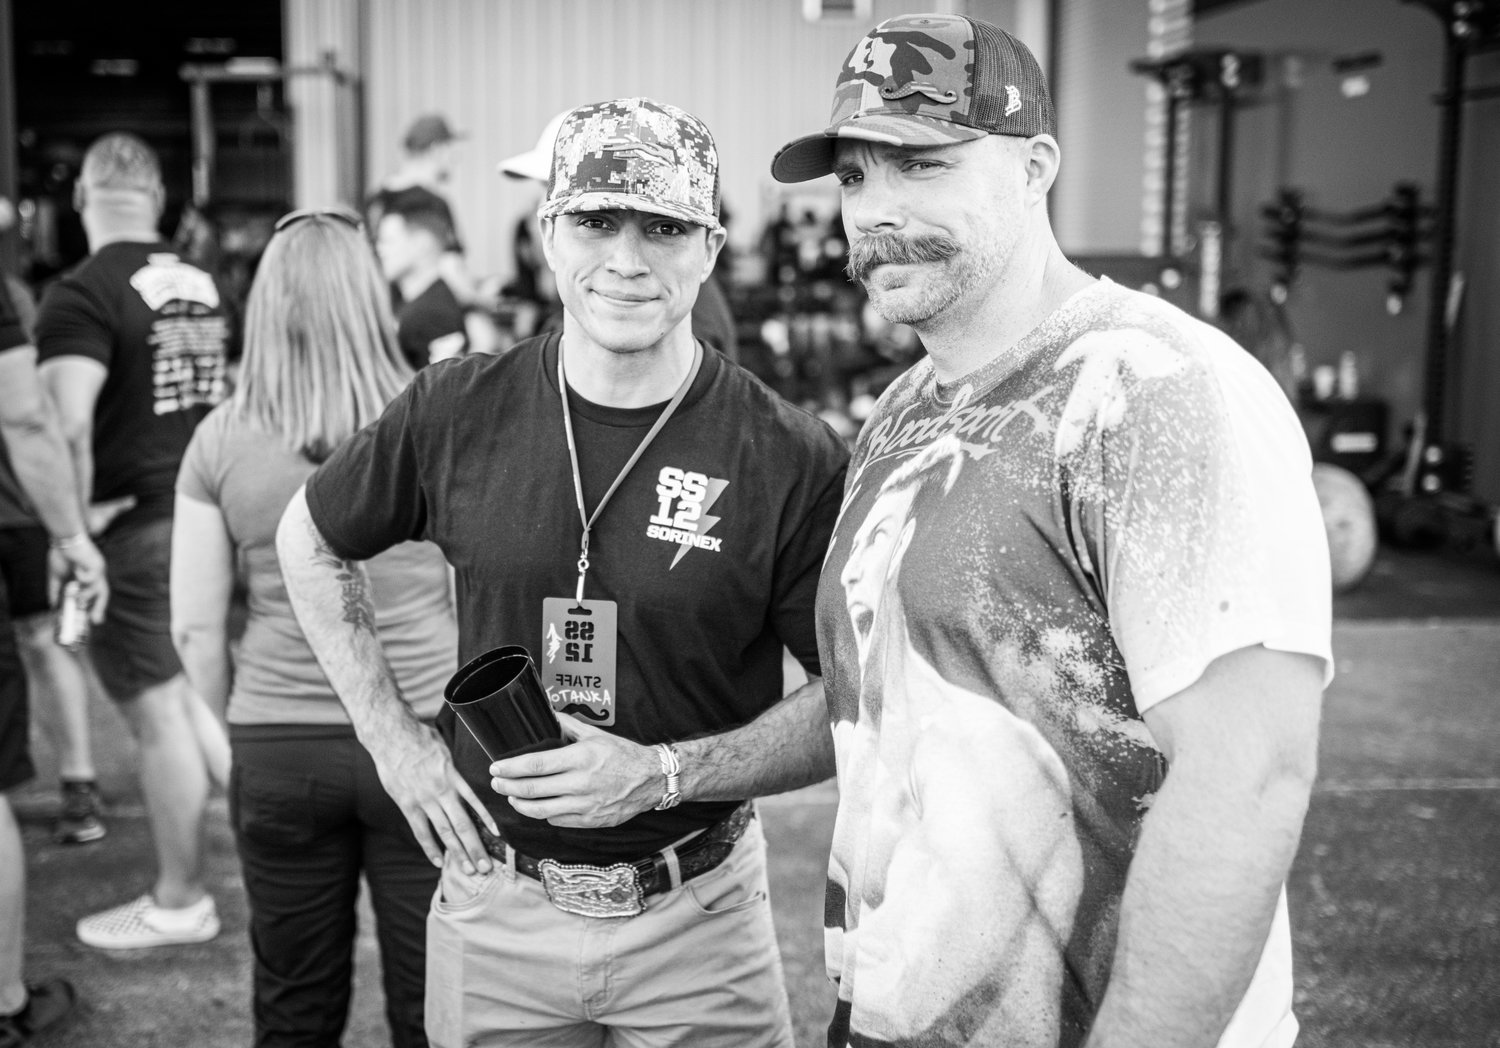 Brady and good friend, Adam Kuehl (IG: @adam_dutch) who was a Guest Speaker at Summer Strong and is the head of Government Training and Solutions at Sorinex.